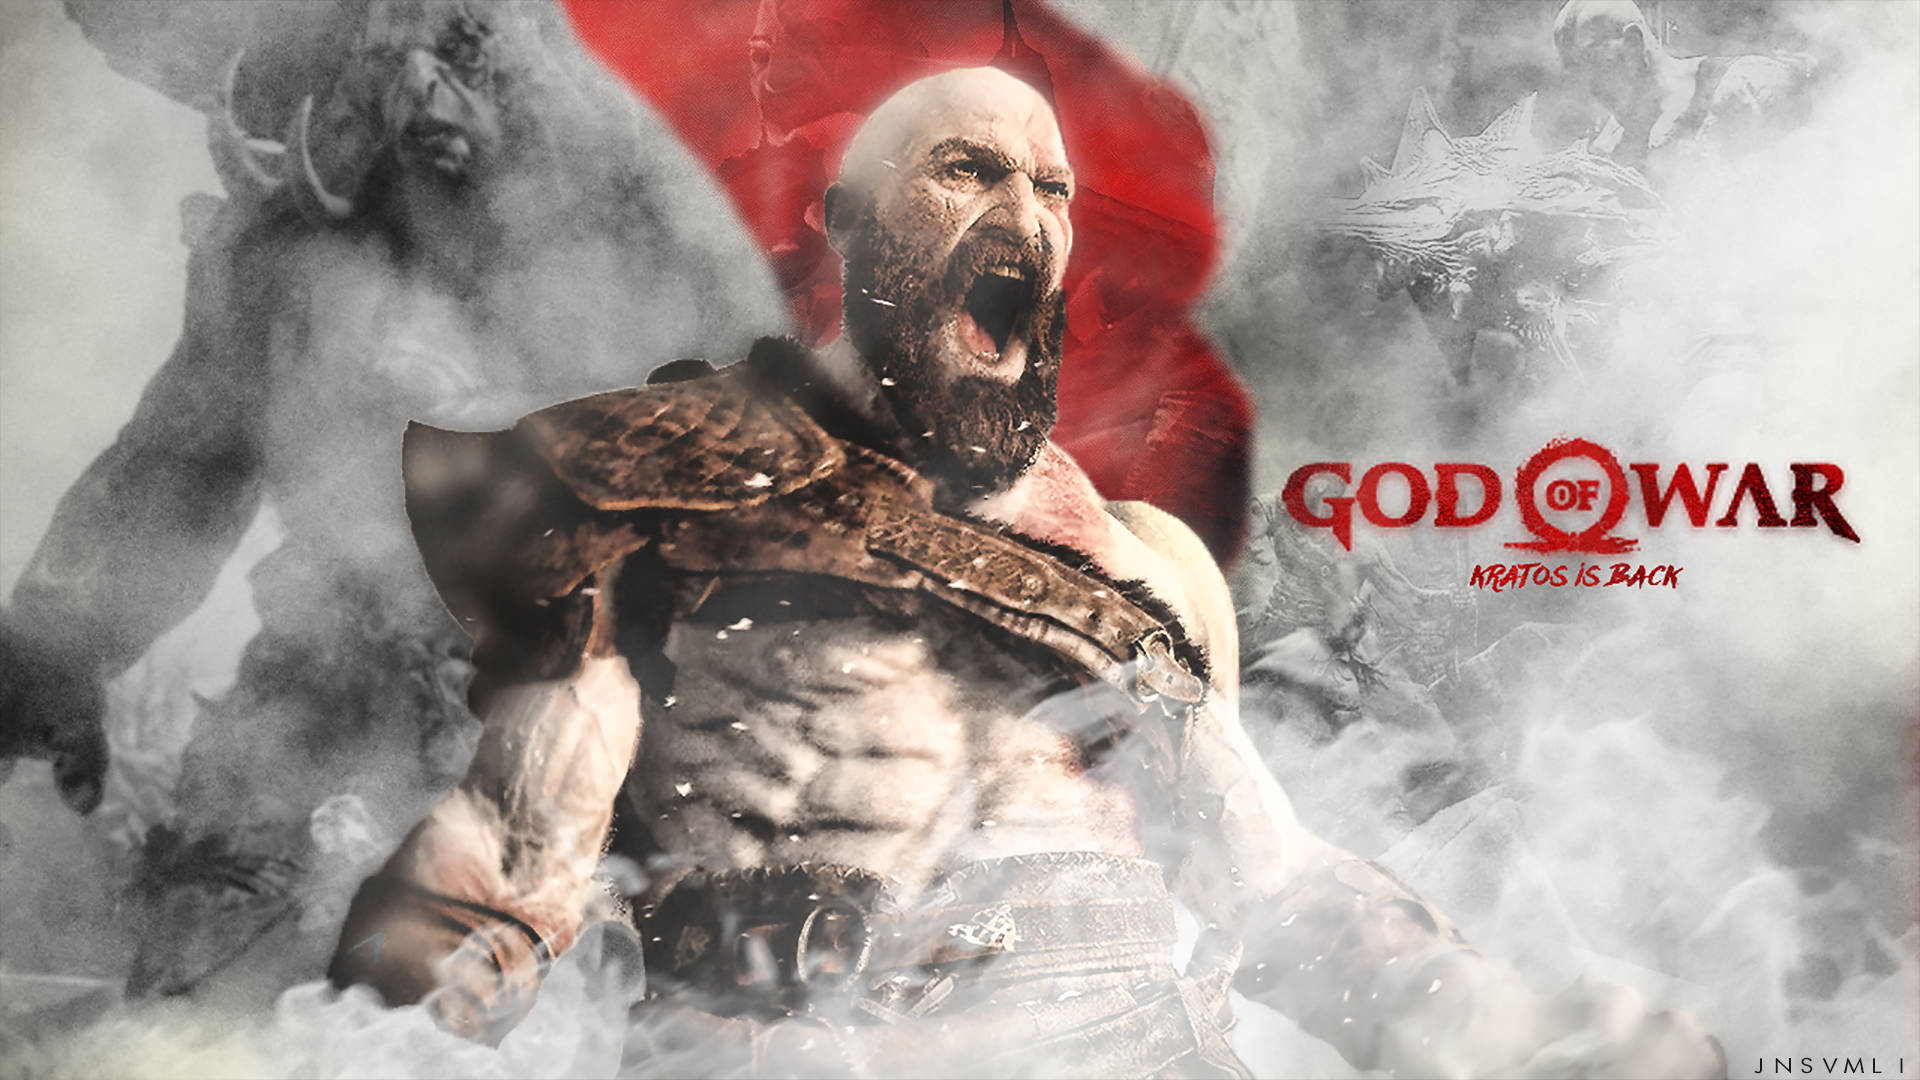 Kratos unleashing his rage in the mythical world of God Of War Wallpaper